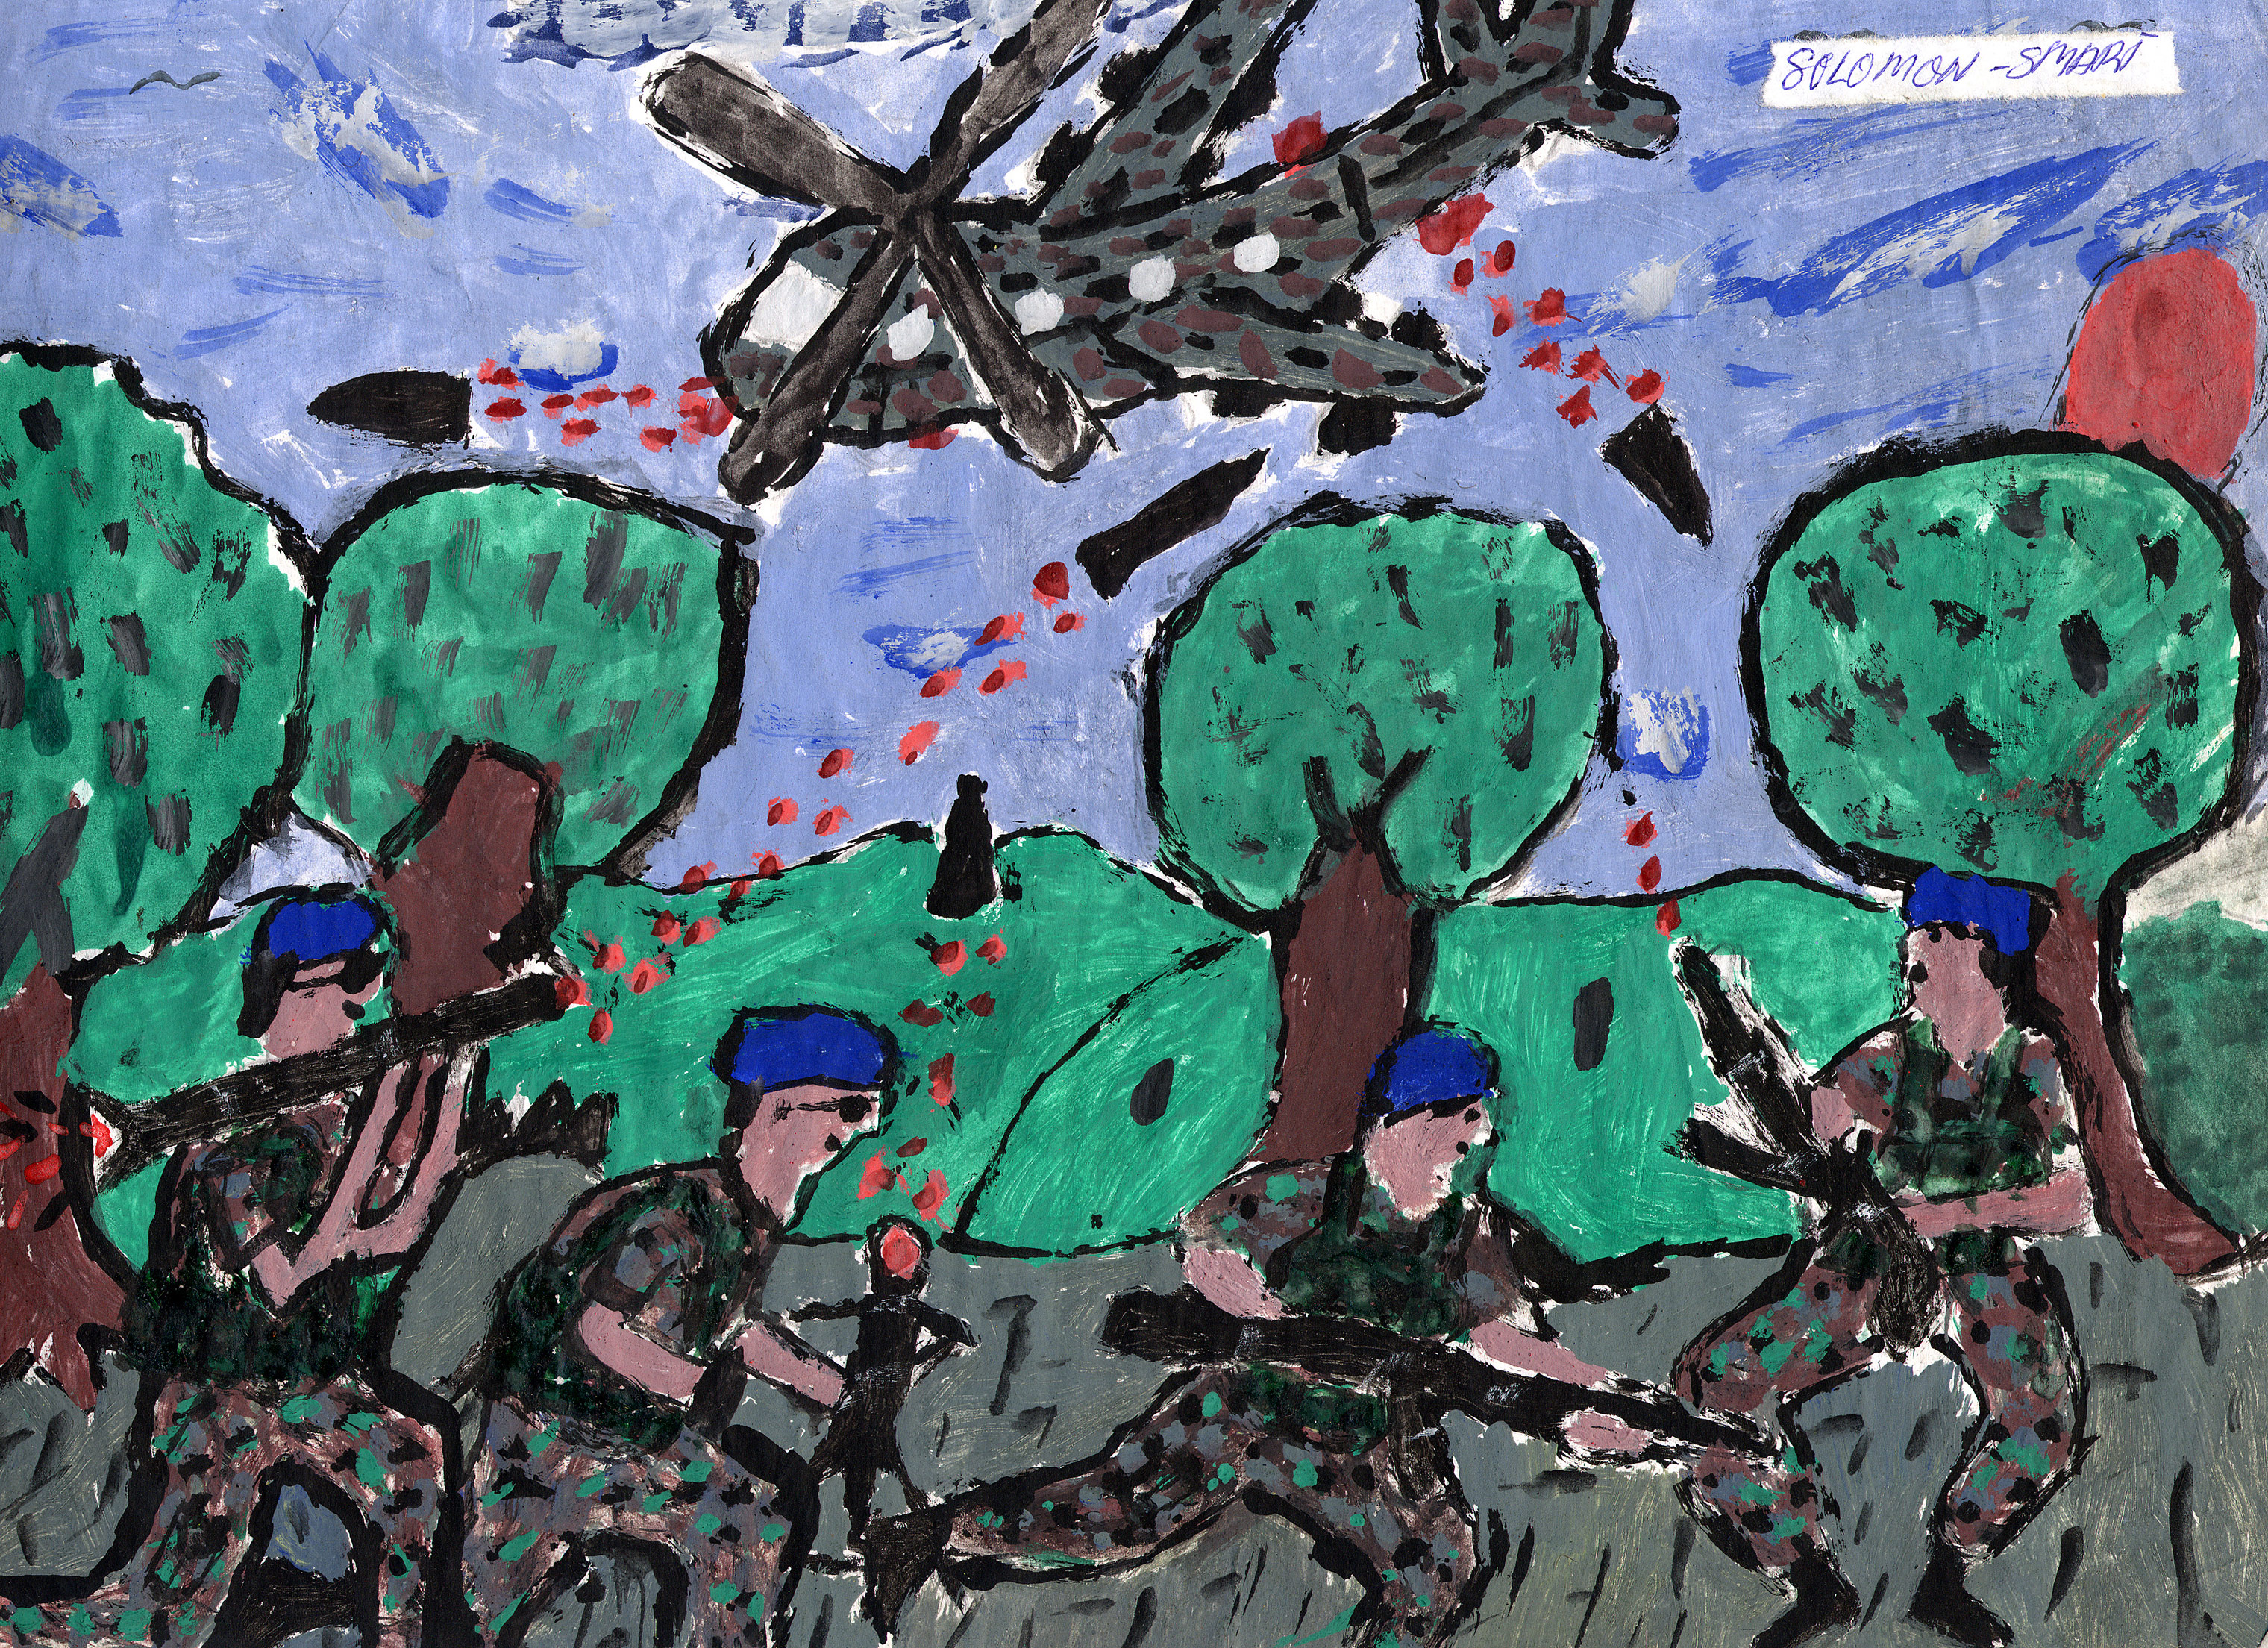 Sierra Leone suffered a civil war from 1991 to 2002. Children made up 50% of the rebel fighting force and a quarter of the government's forces. Former child soldiers were transferred to the IRC's care centers, where they drew images of their experiences. (IRC)